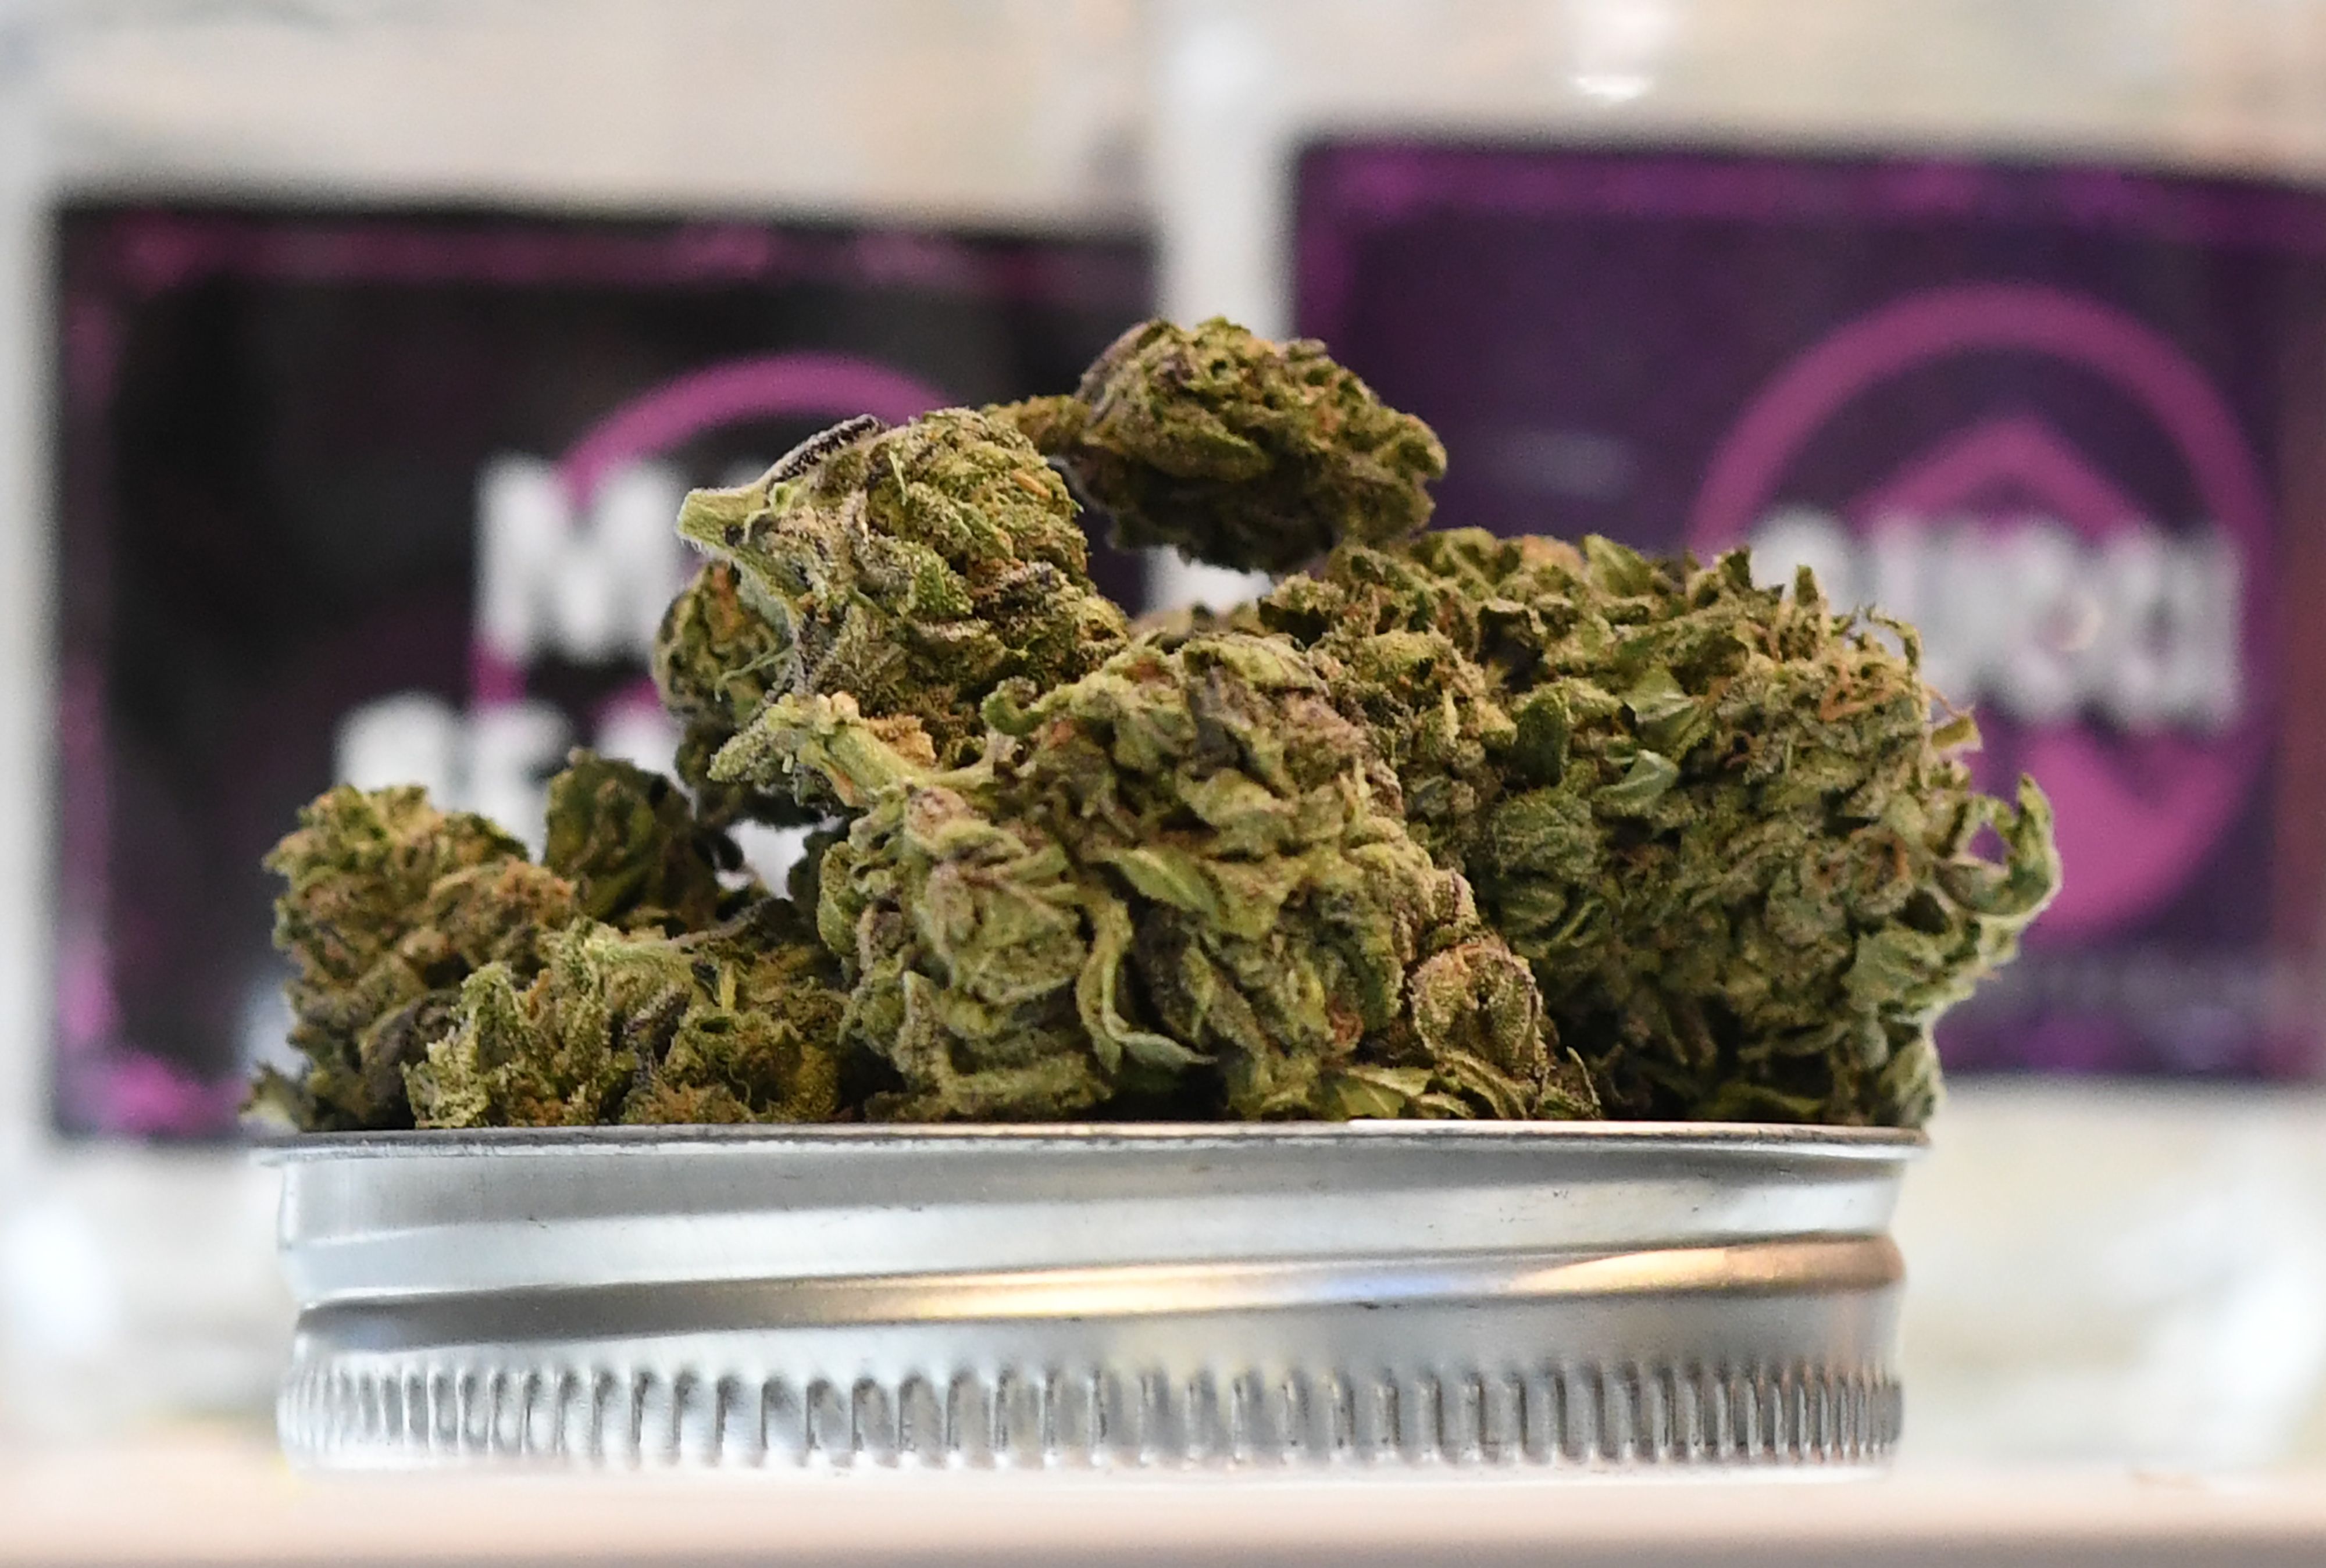 With the San Francisco Marijuana Dispensary, you will feel comfortable and safe when consuming Cannabis